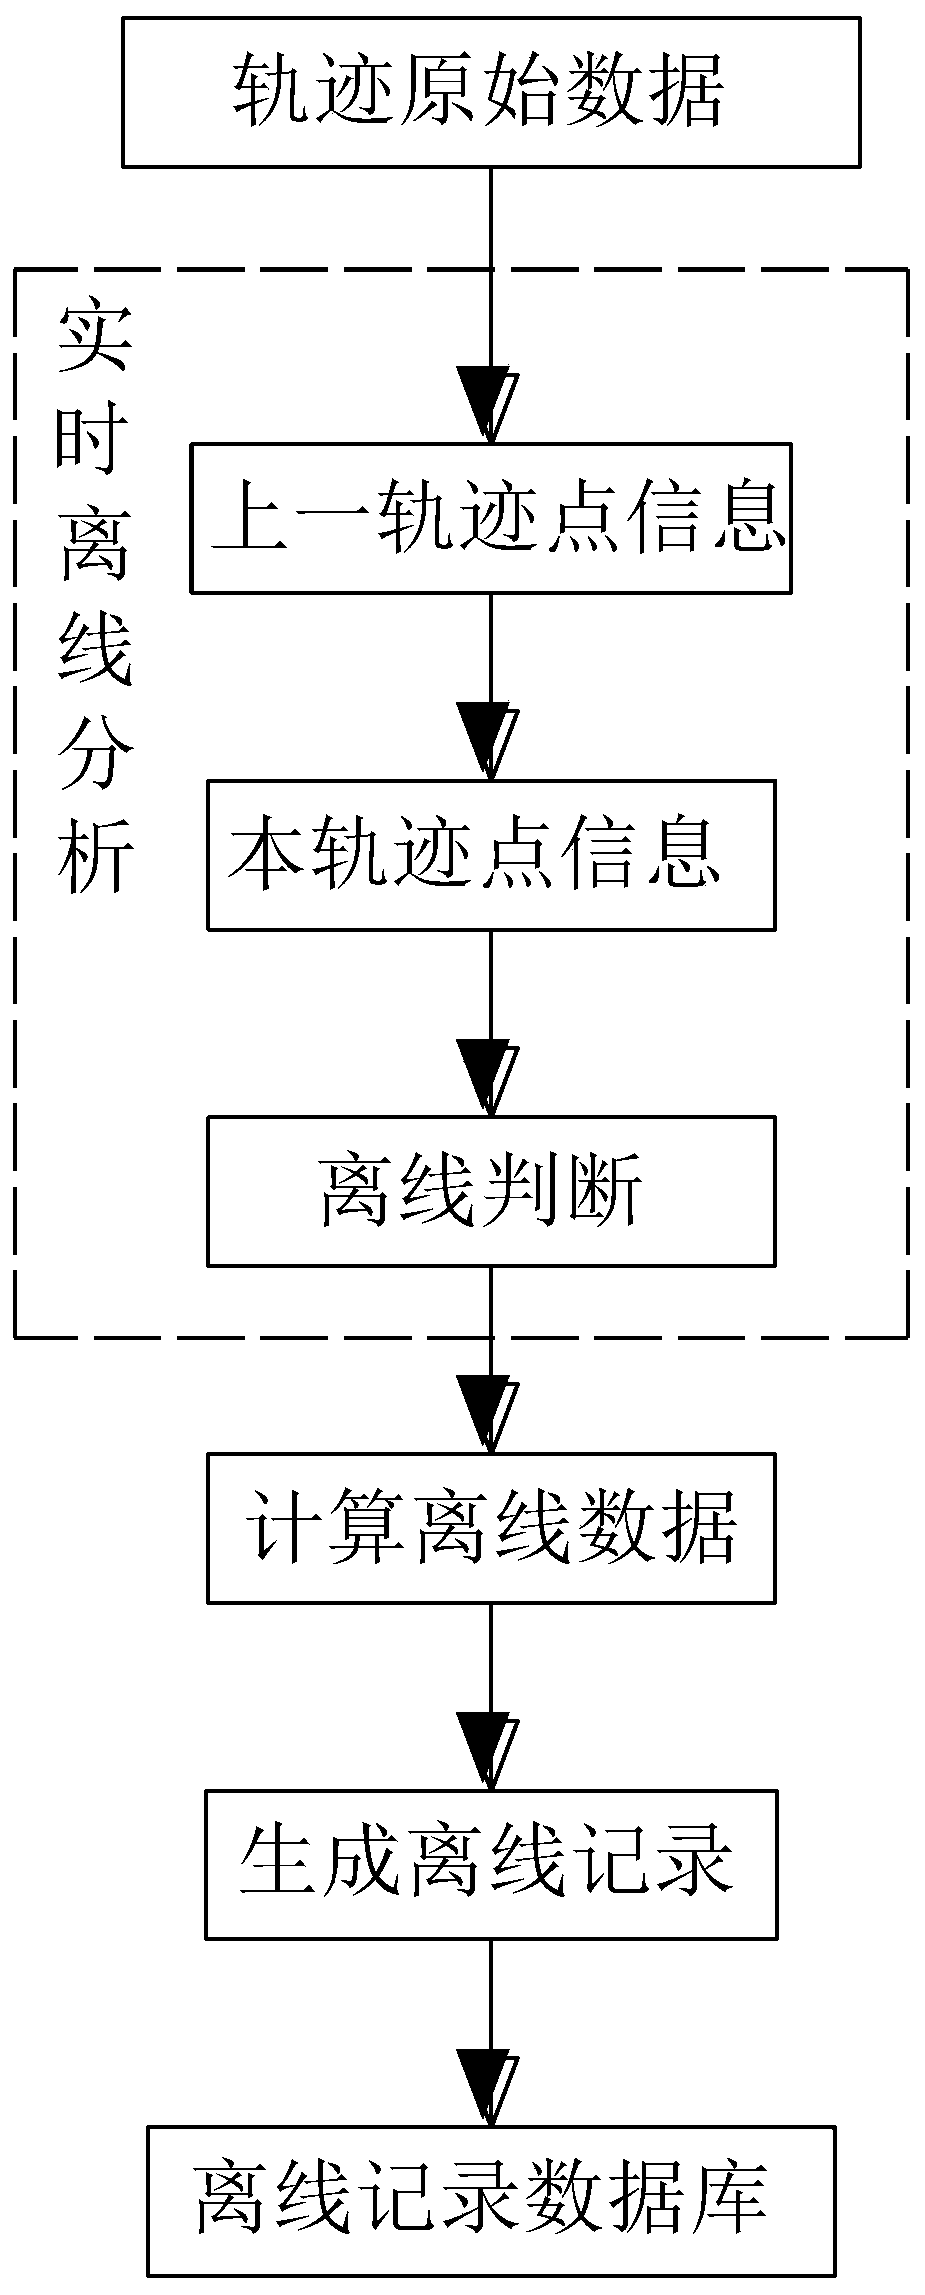 Vehicle illegal driving risk analysis method based on Beidou positioning system